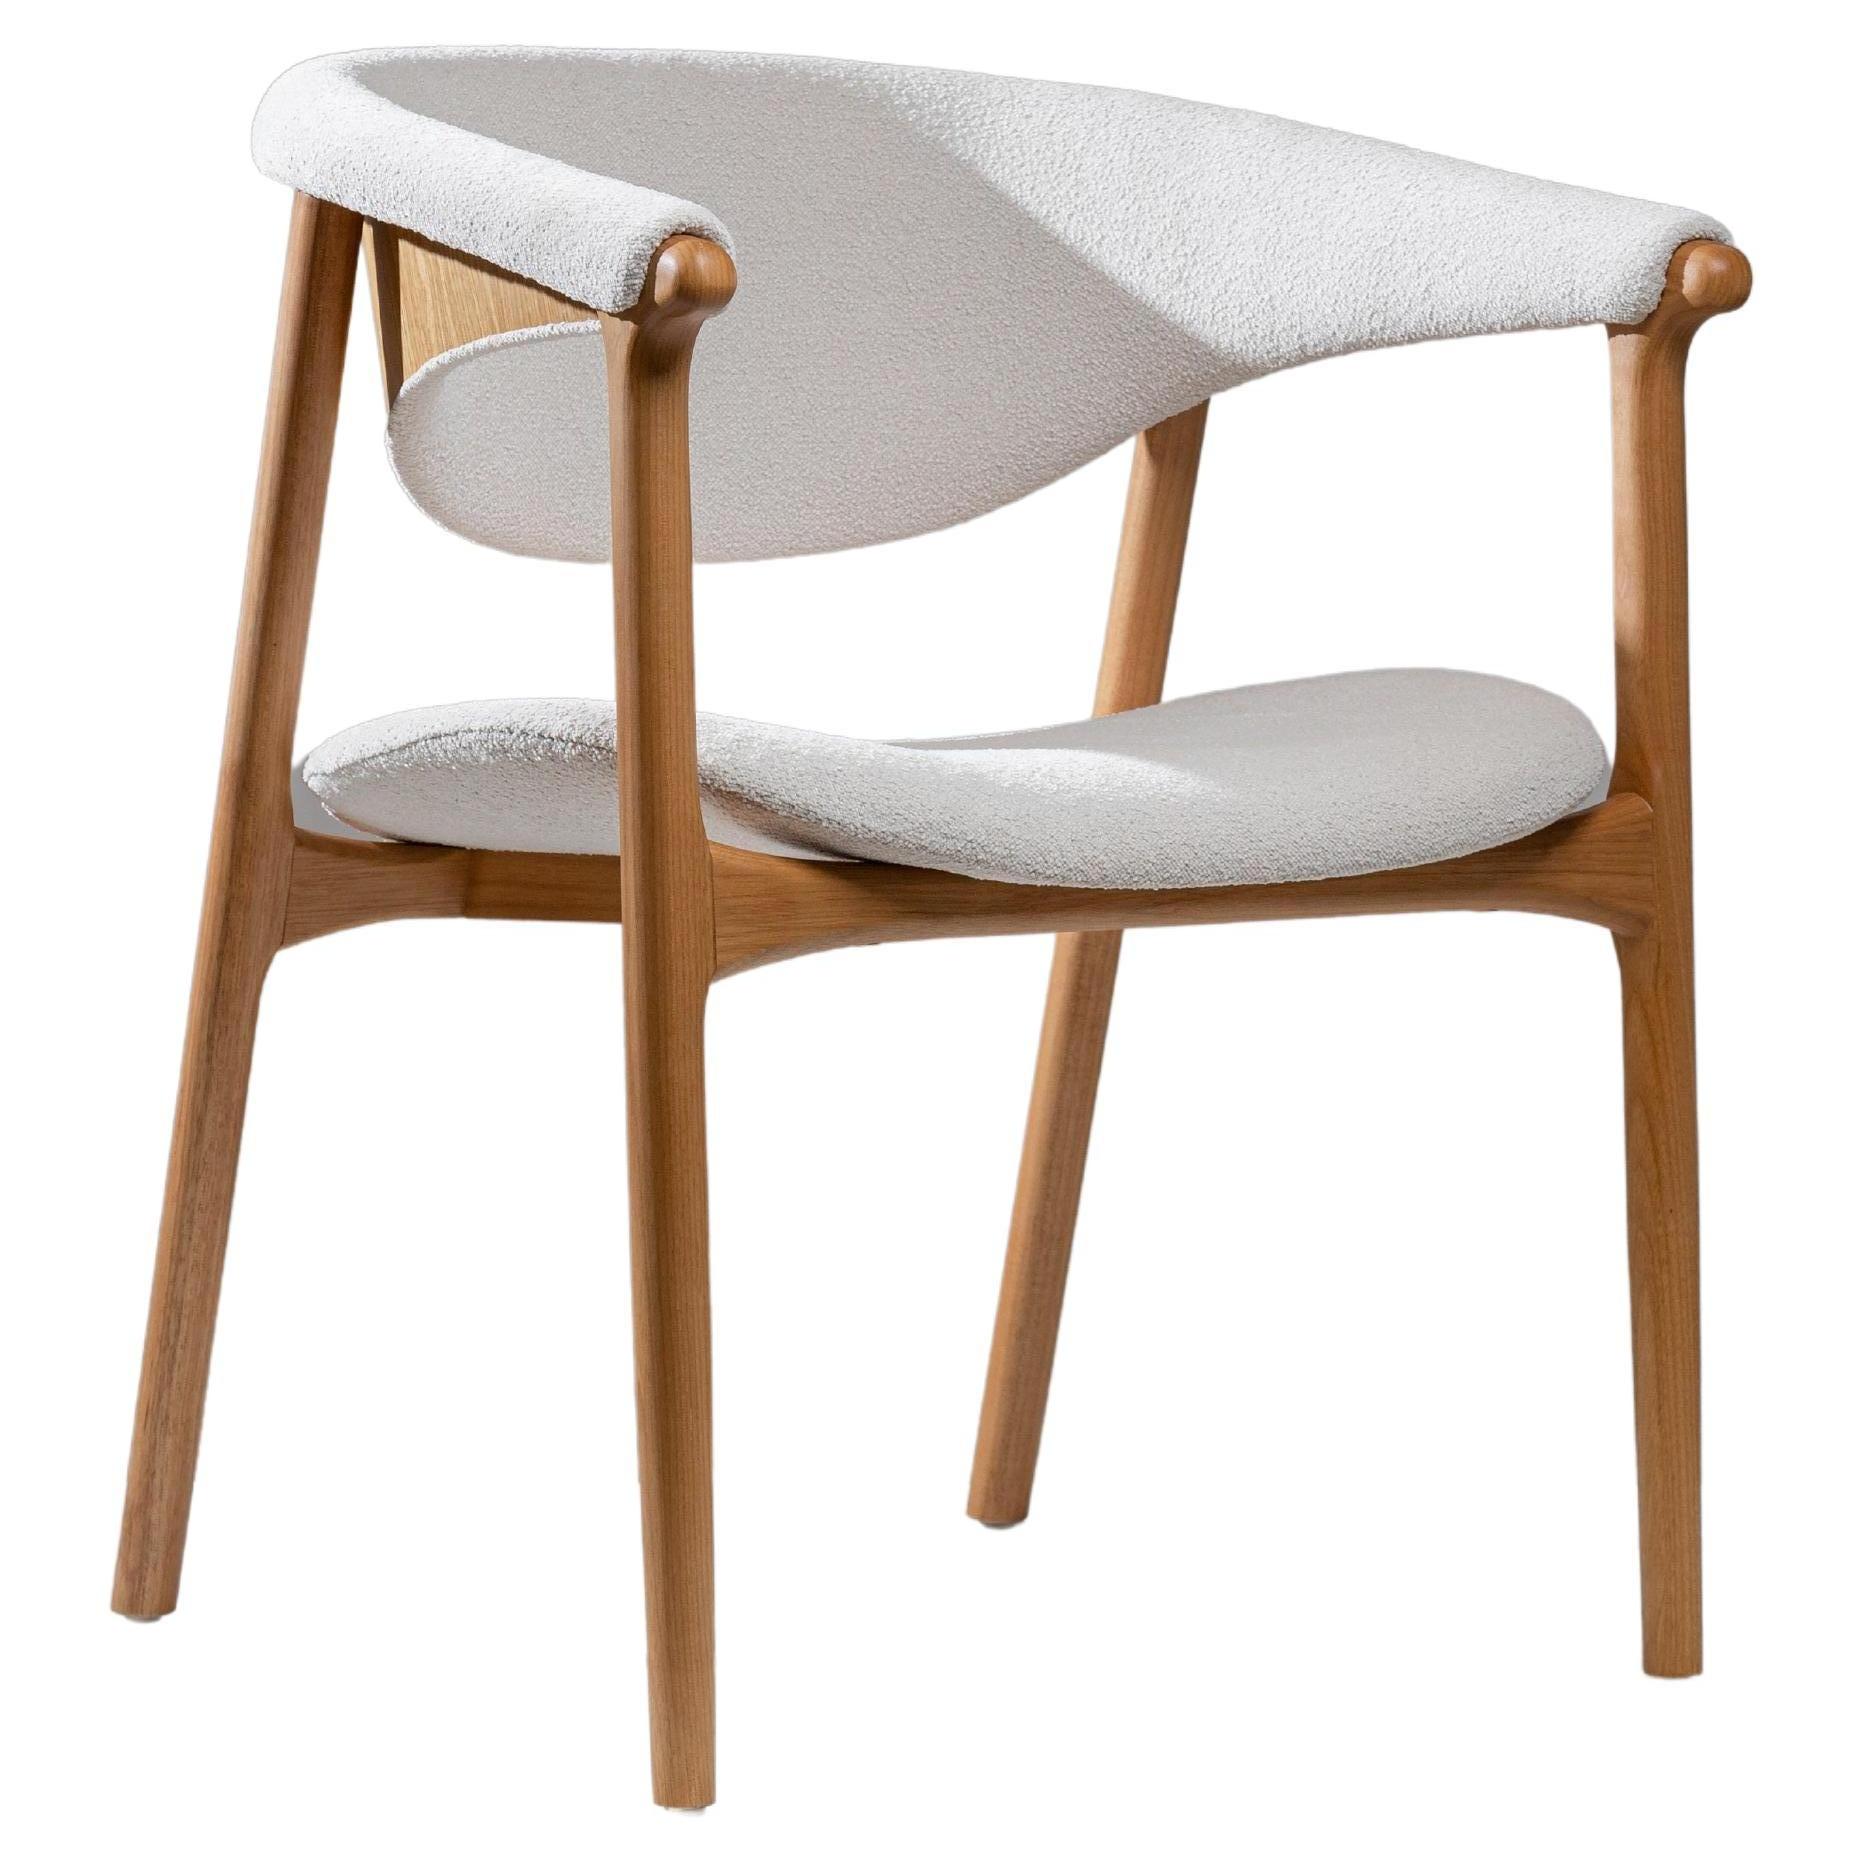 Arraia Wood Back Brazilian Contemporary Wood and Fabric Chair by Lattoog